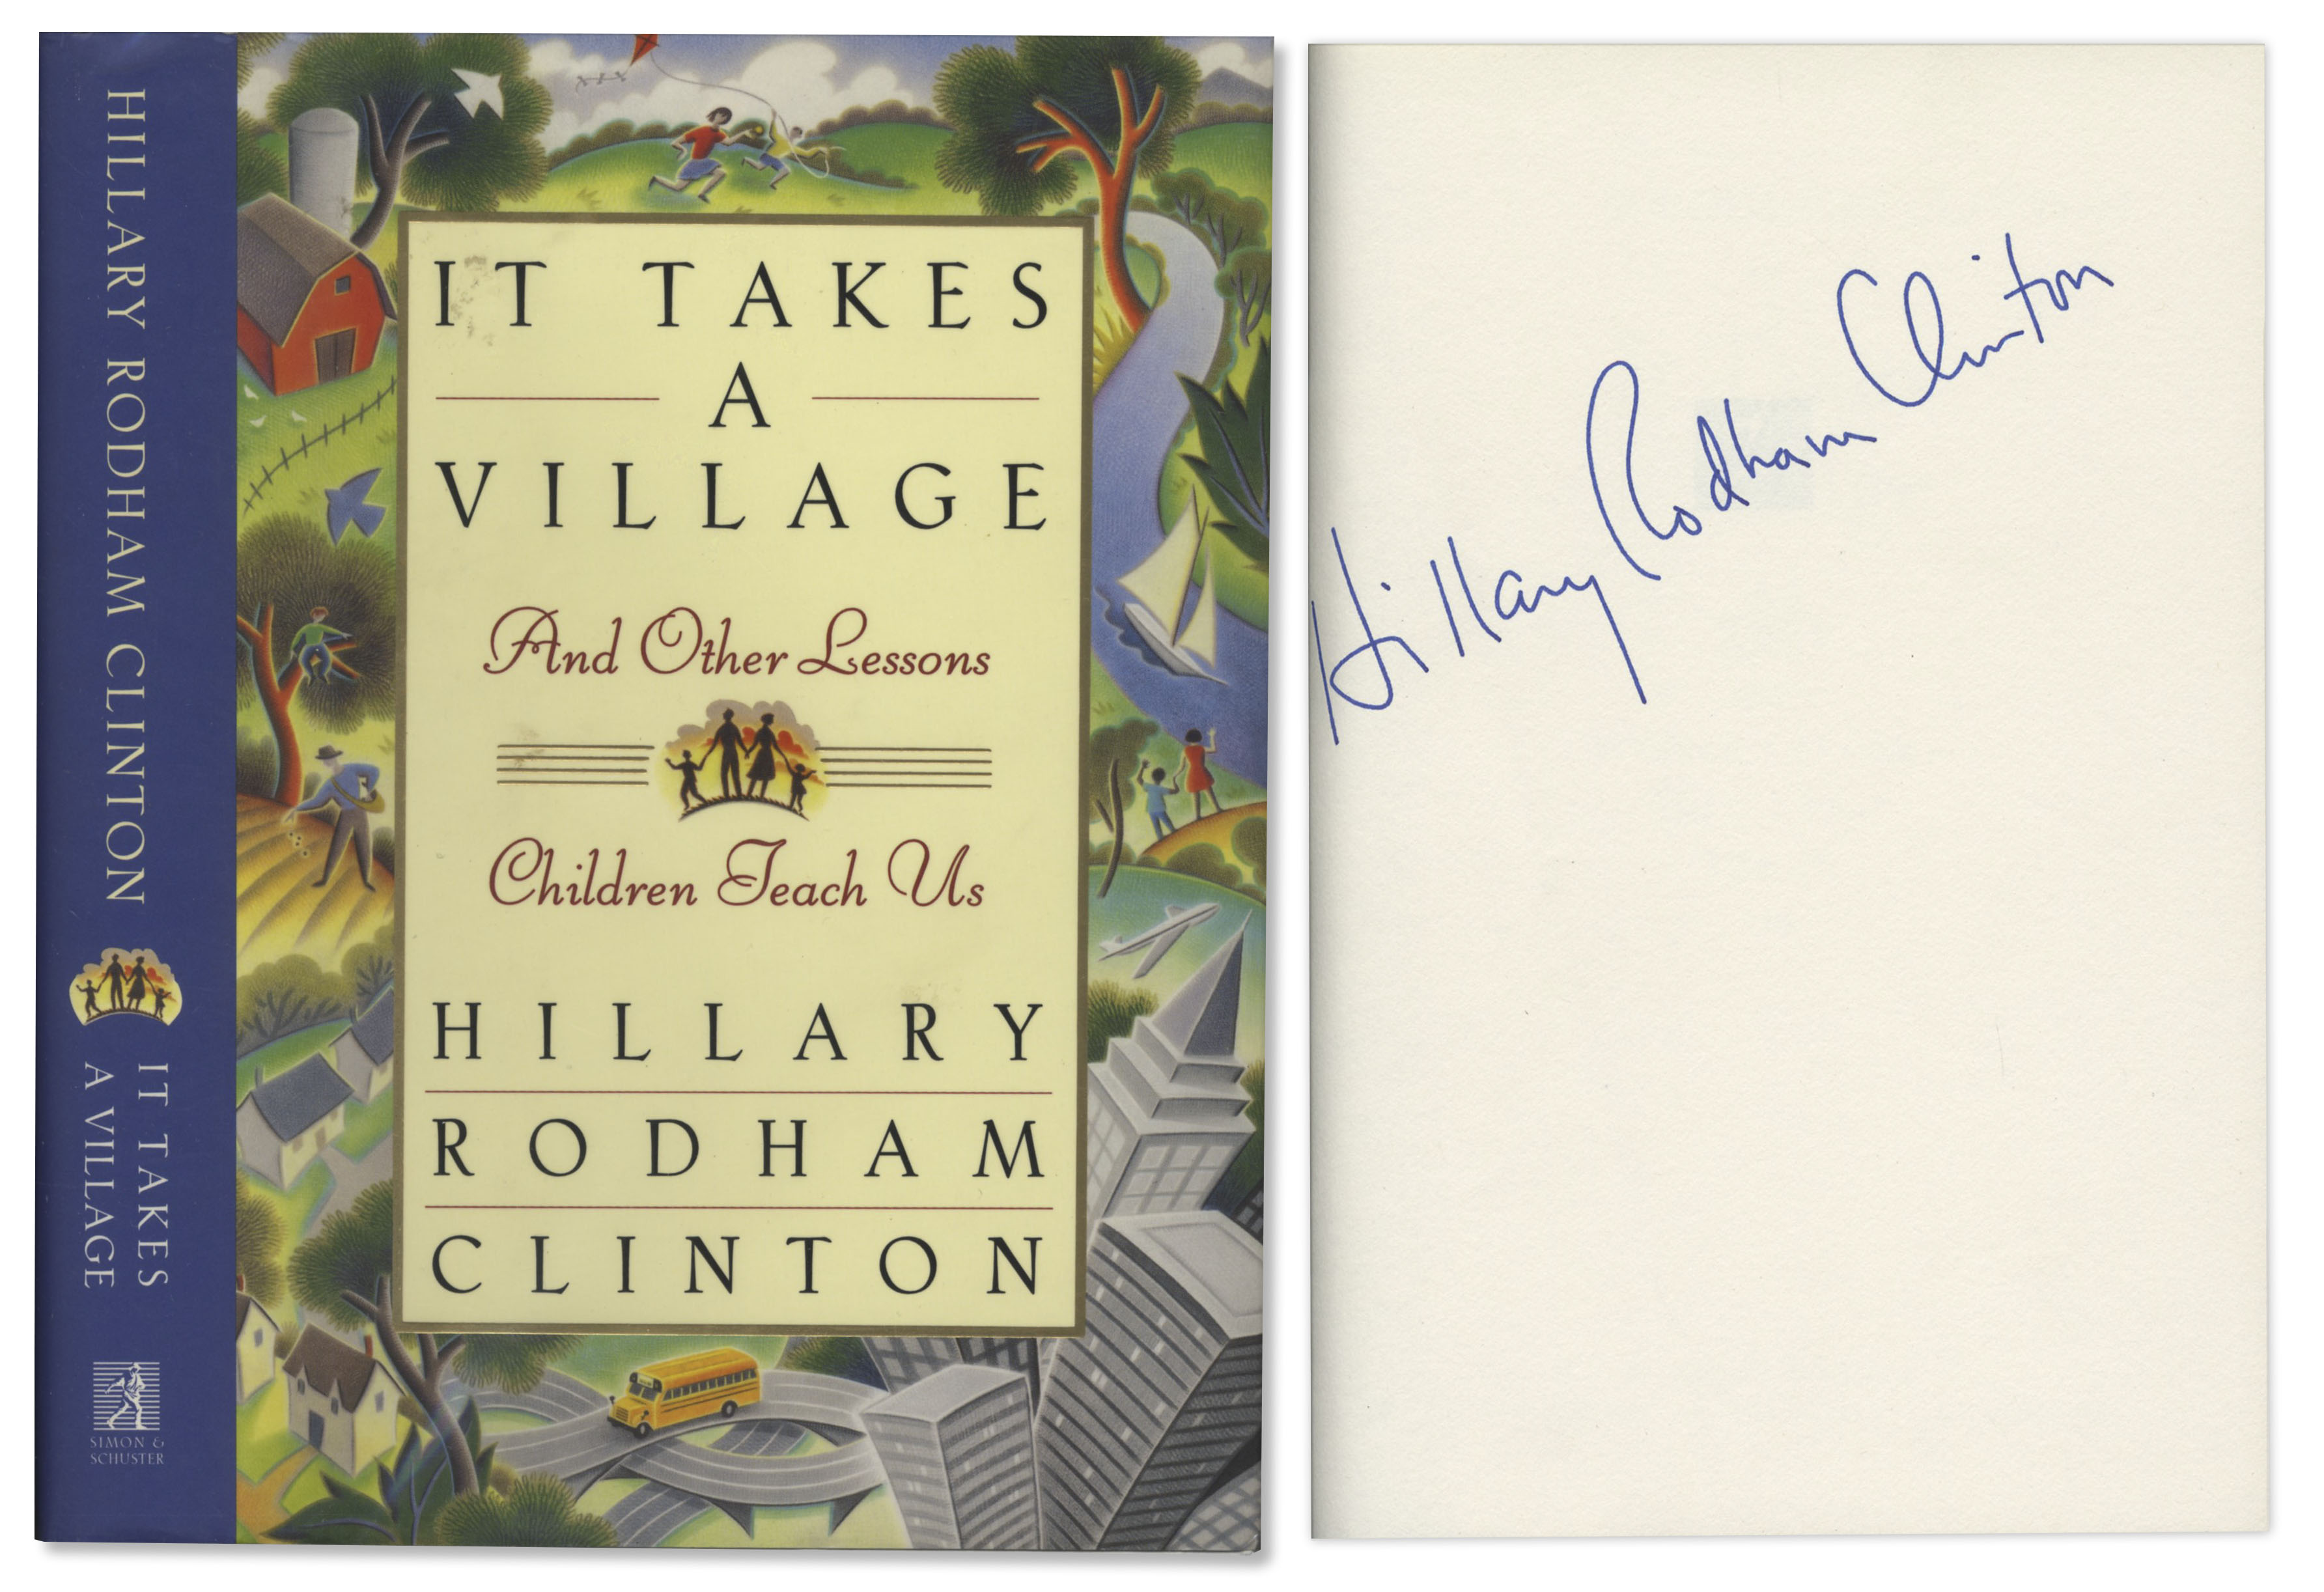 Hillary Clinton Signed ''It Takes a Village'' -- Near Fine Hillary Clinton signed copy of her